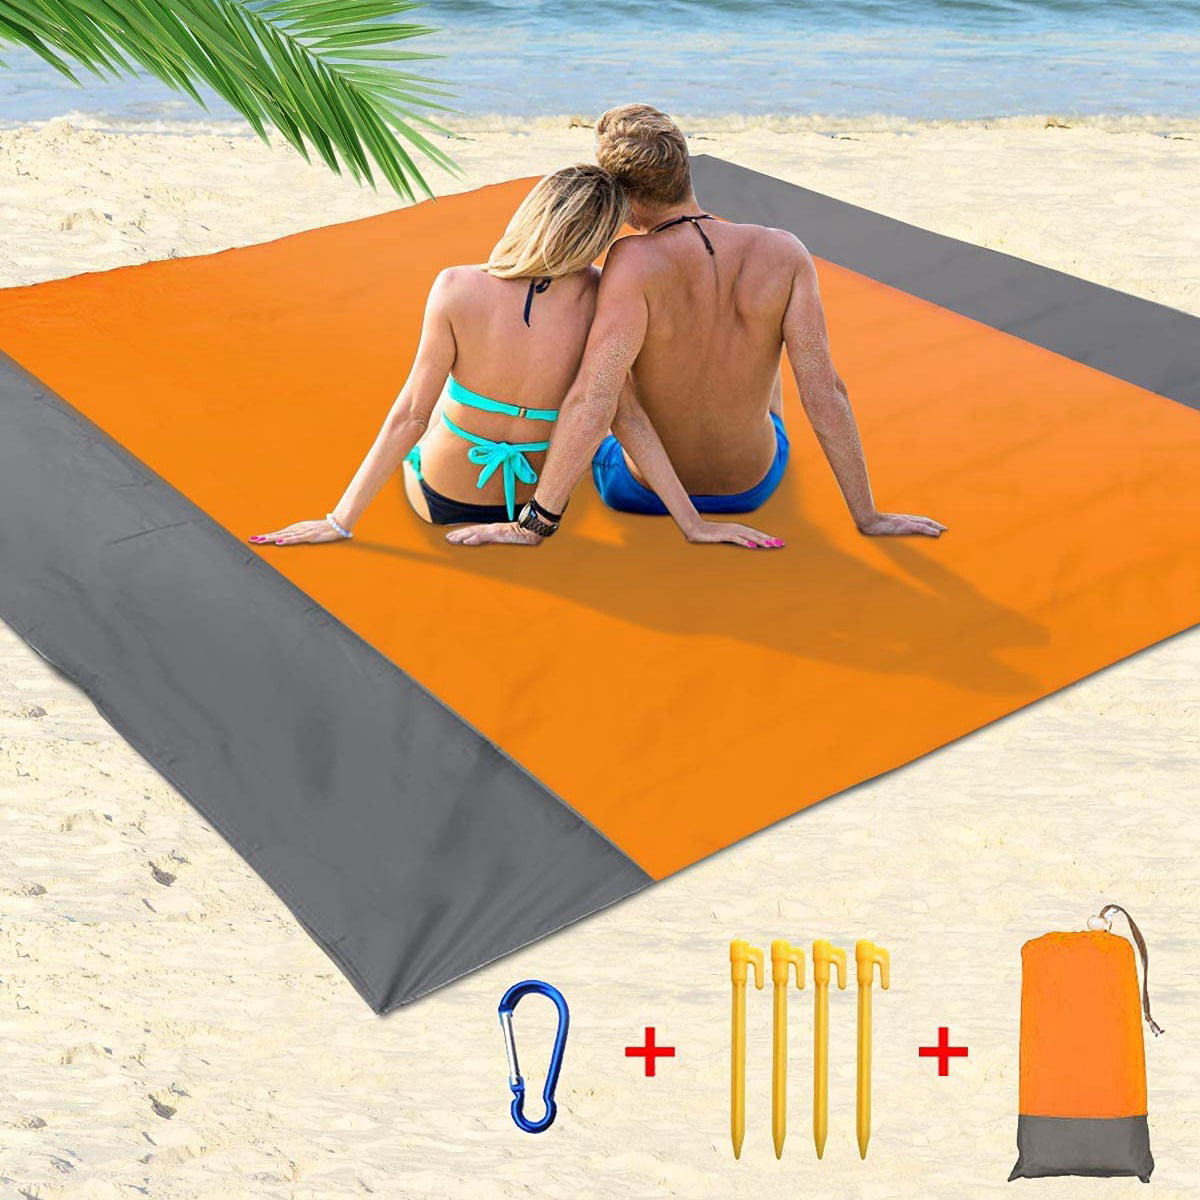 Reinforced Edging for Beach Camping Extra Large 210 x 200cm Beach blanket Waterproof Sandproof Water Resistant Picnic Blanket with 4 Fixed Nails ISOPHO Beach Mat Picnic Blanket Hiking & Picnic